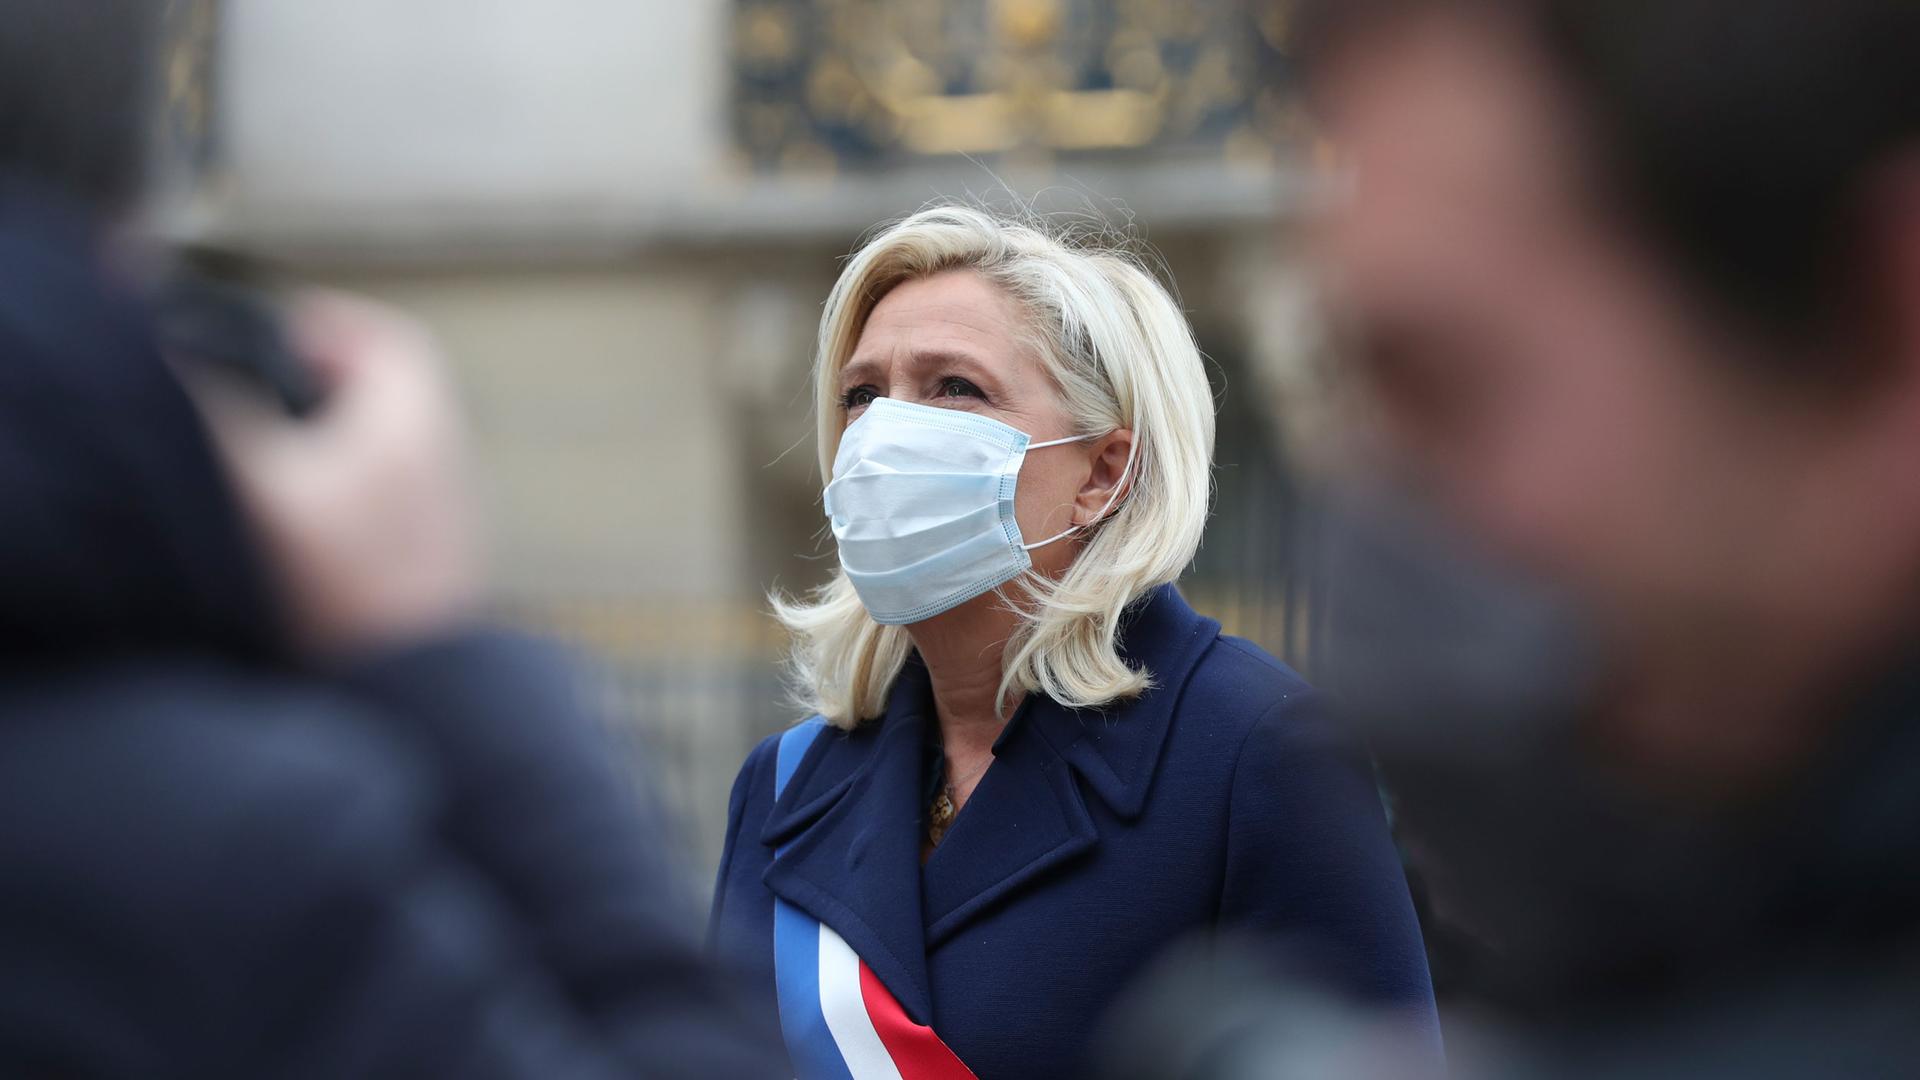 Marine Le Pen is shown wearing a blue jacket and a sash with the colors of the French flag over her shoulder.